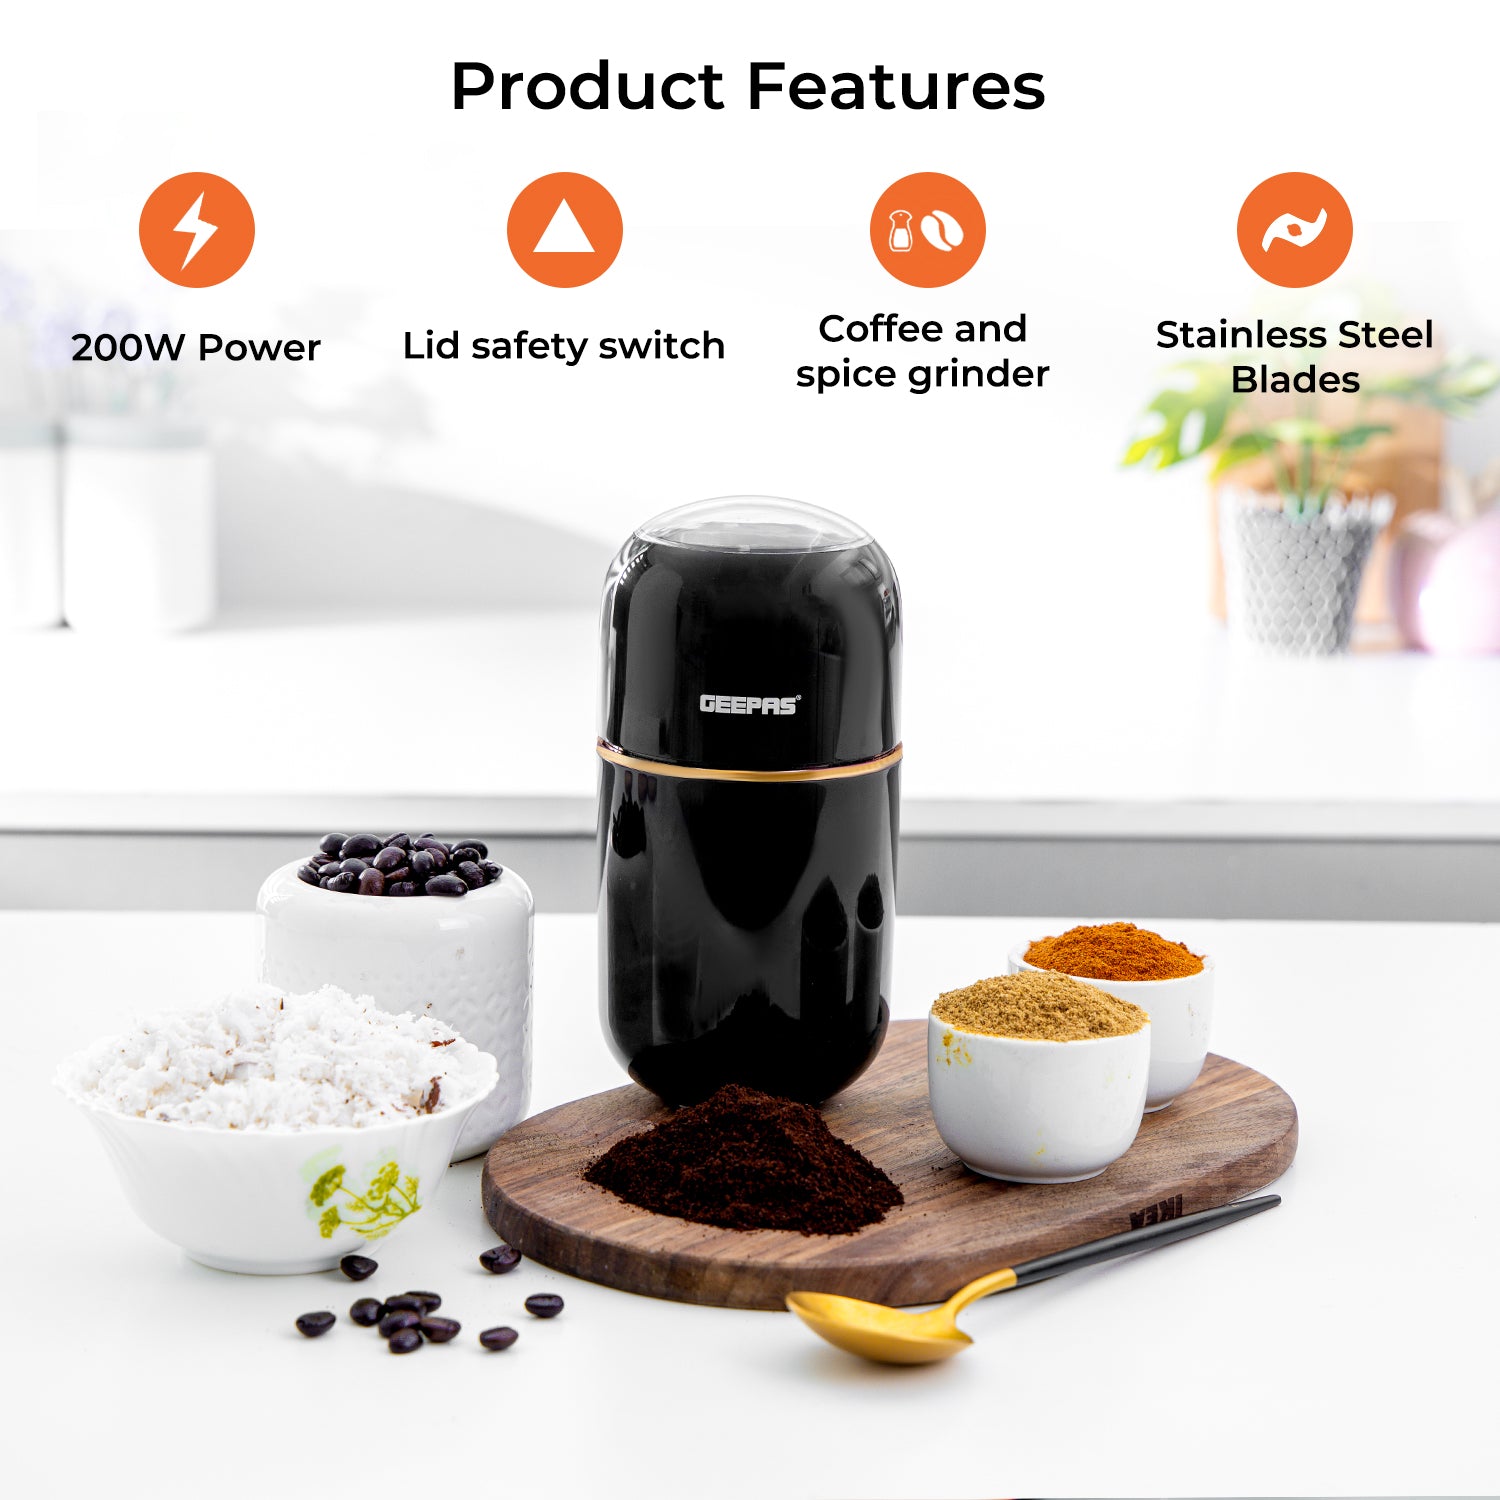 200W Press-Down Portable Coffee and Spice Mixer Grinder